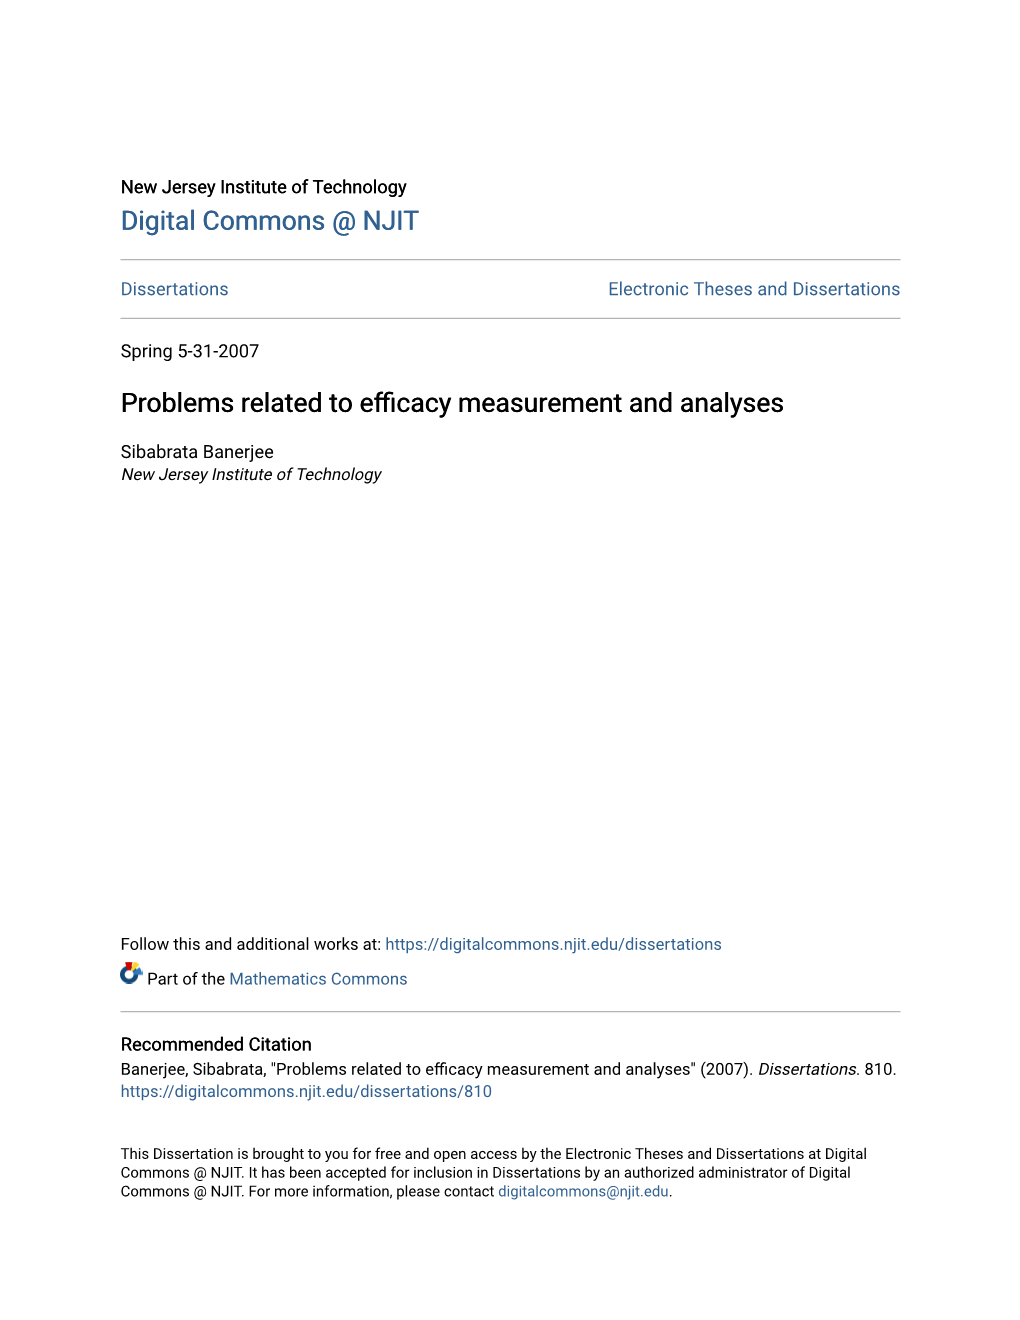 Problems Related to Efficacy Measurement and Analyses